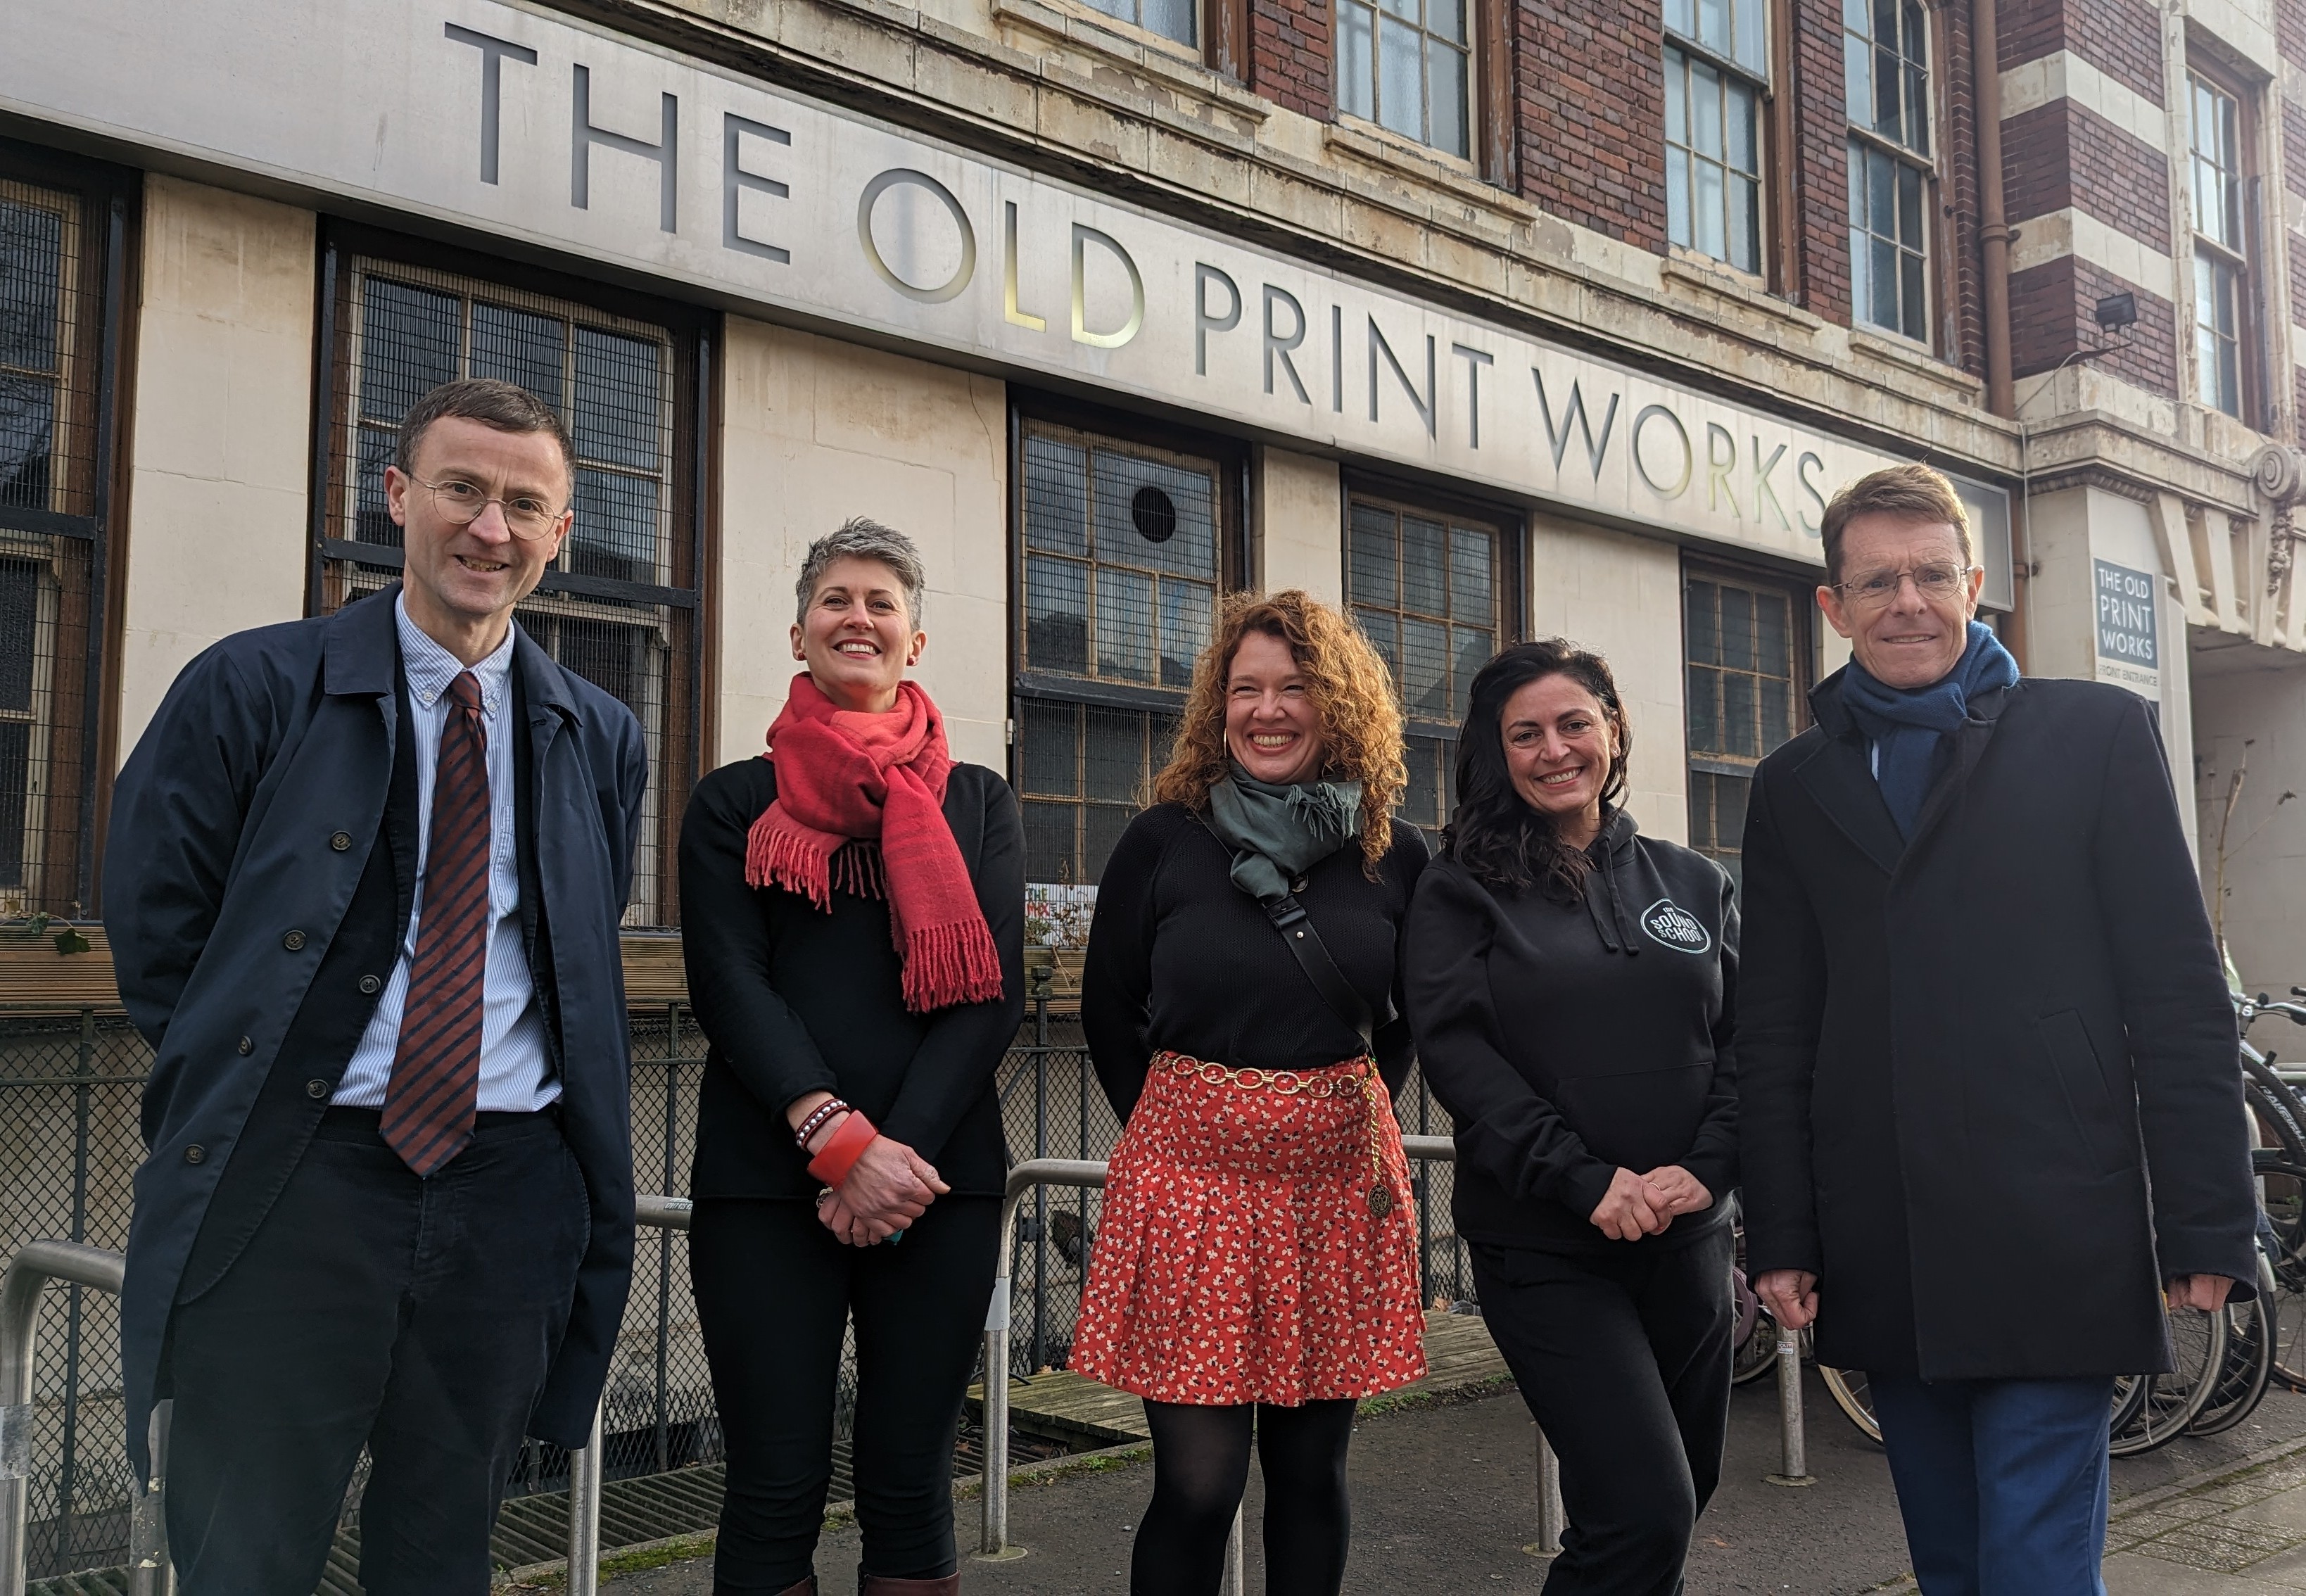 Matthew Mckeague, chief executive of the Architectural Heritage Fund and a member of the WMCA Heritage Taskforce, Hannah Greenwood, interim chief executive of Make It Sustainable, which runs The Old Print Works, Hannah Warwick from sustainable fashion brand Hulahan and Huda Arnout, from The Sound School, who are both based at The Old Print Works, and Andy Street, Mayor of West Midlands and WMCA chair.